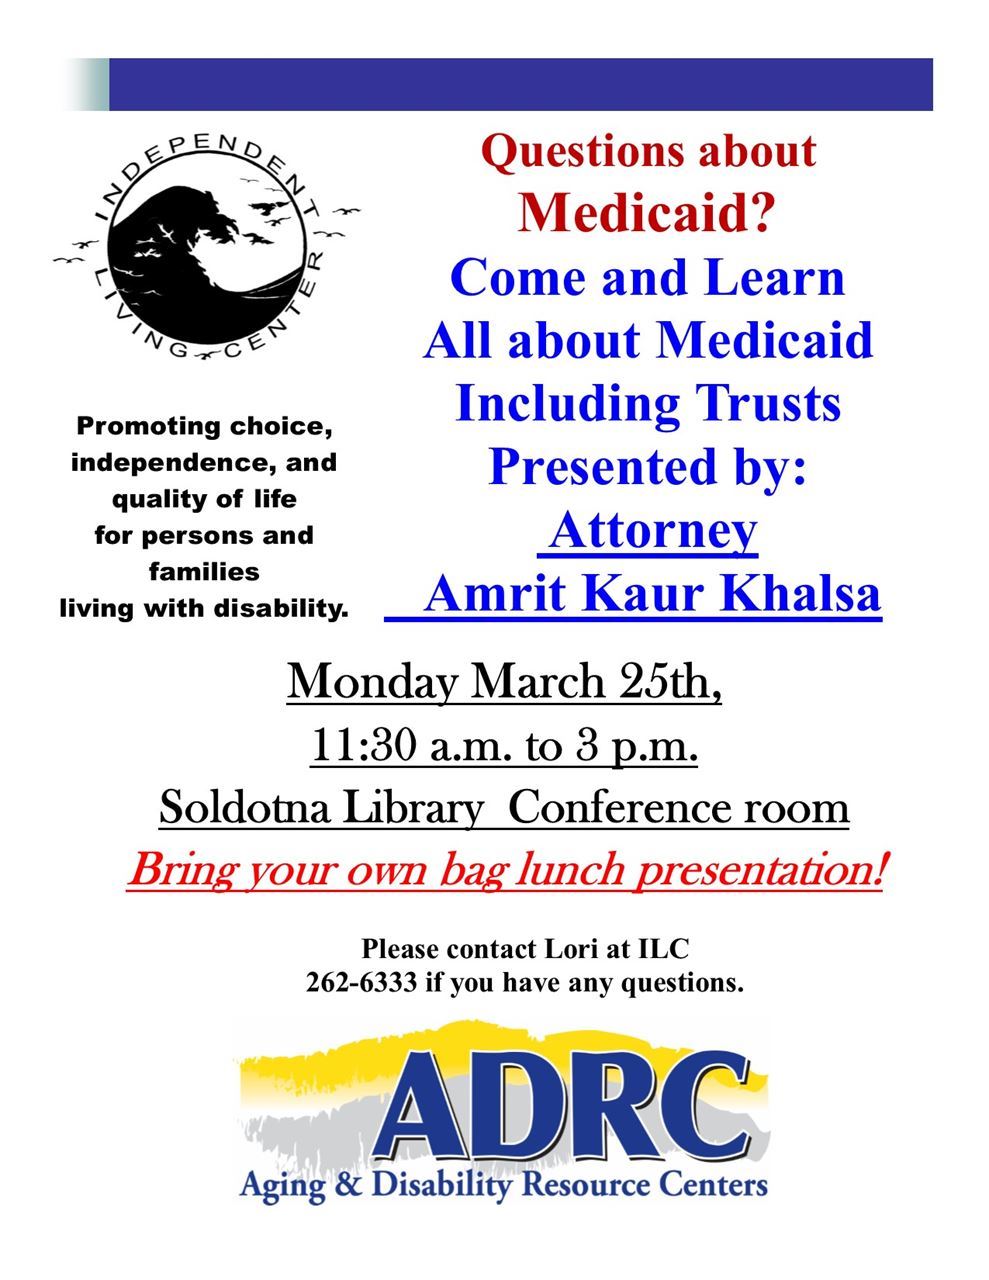 Learn about Medicaid Trusta presented by Attorney Amrit Kaur Khalsa. March 25th, 130 to 300 Soldotna Library Conference room